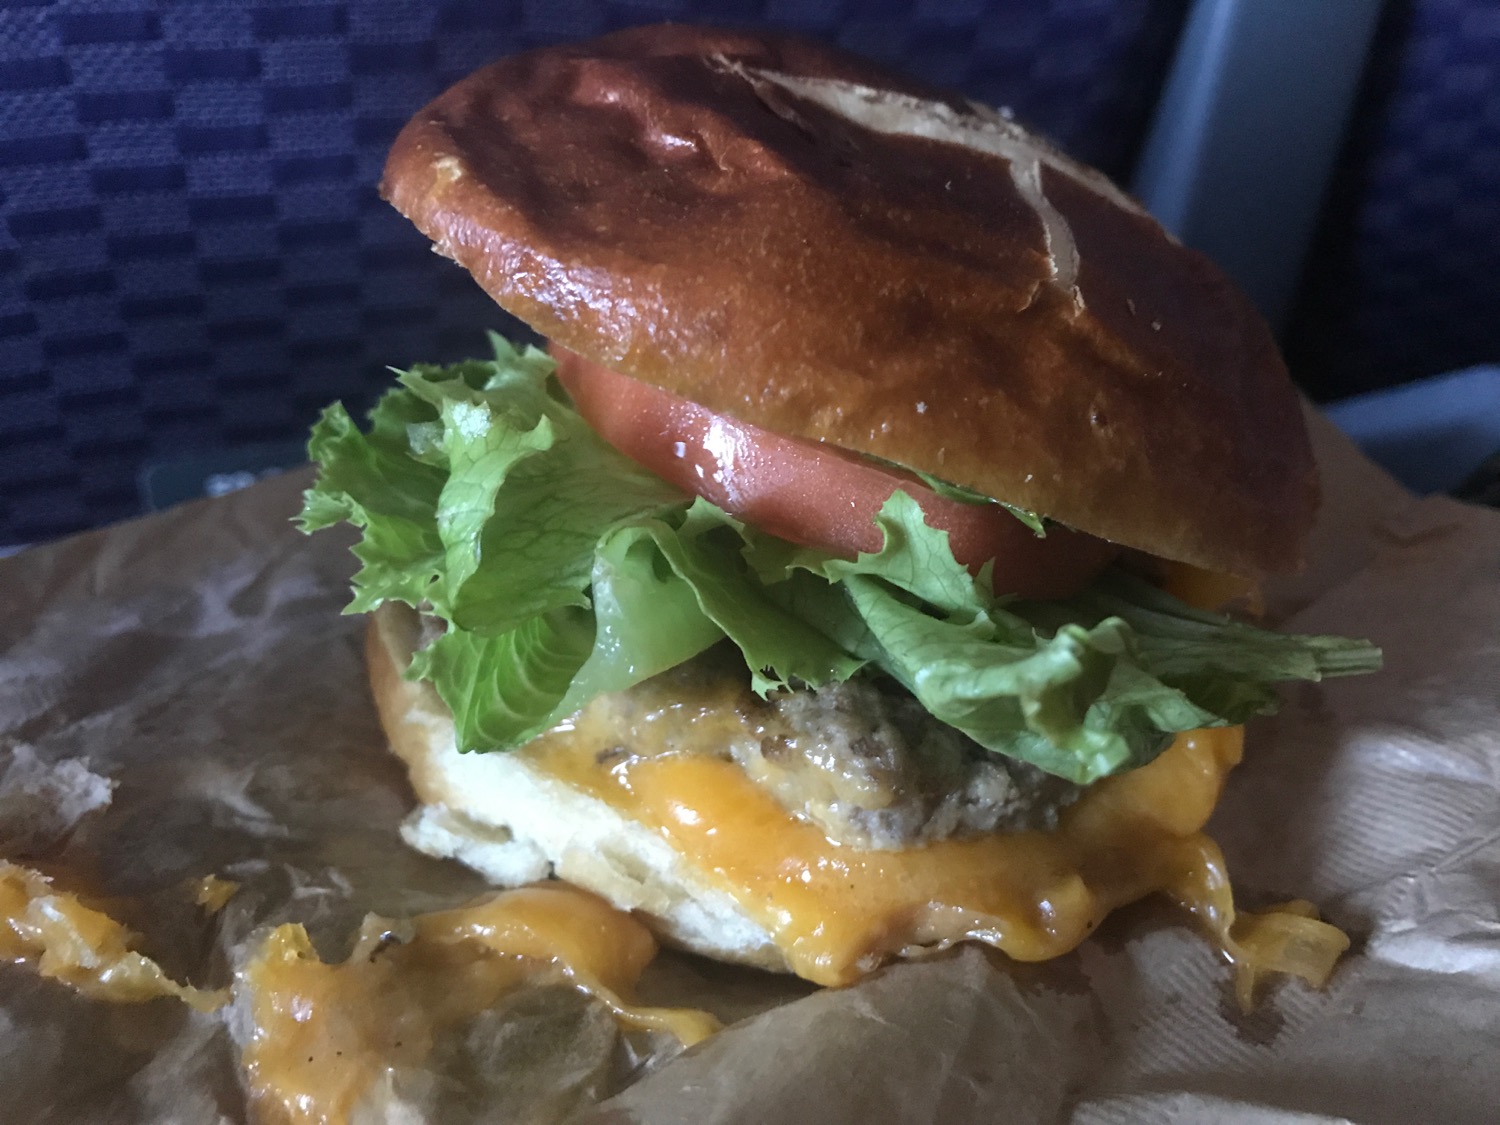 a cheeseburger on a brown paper